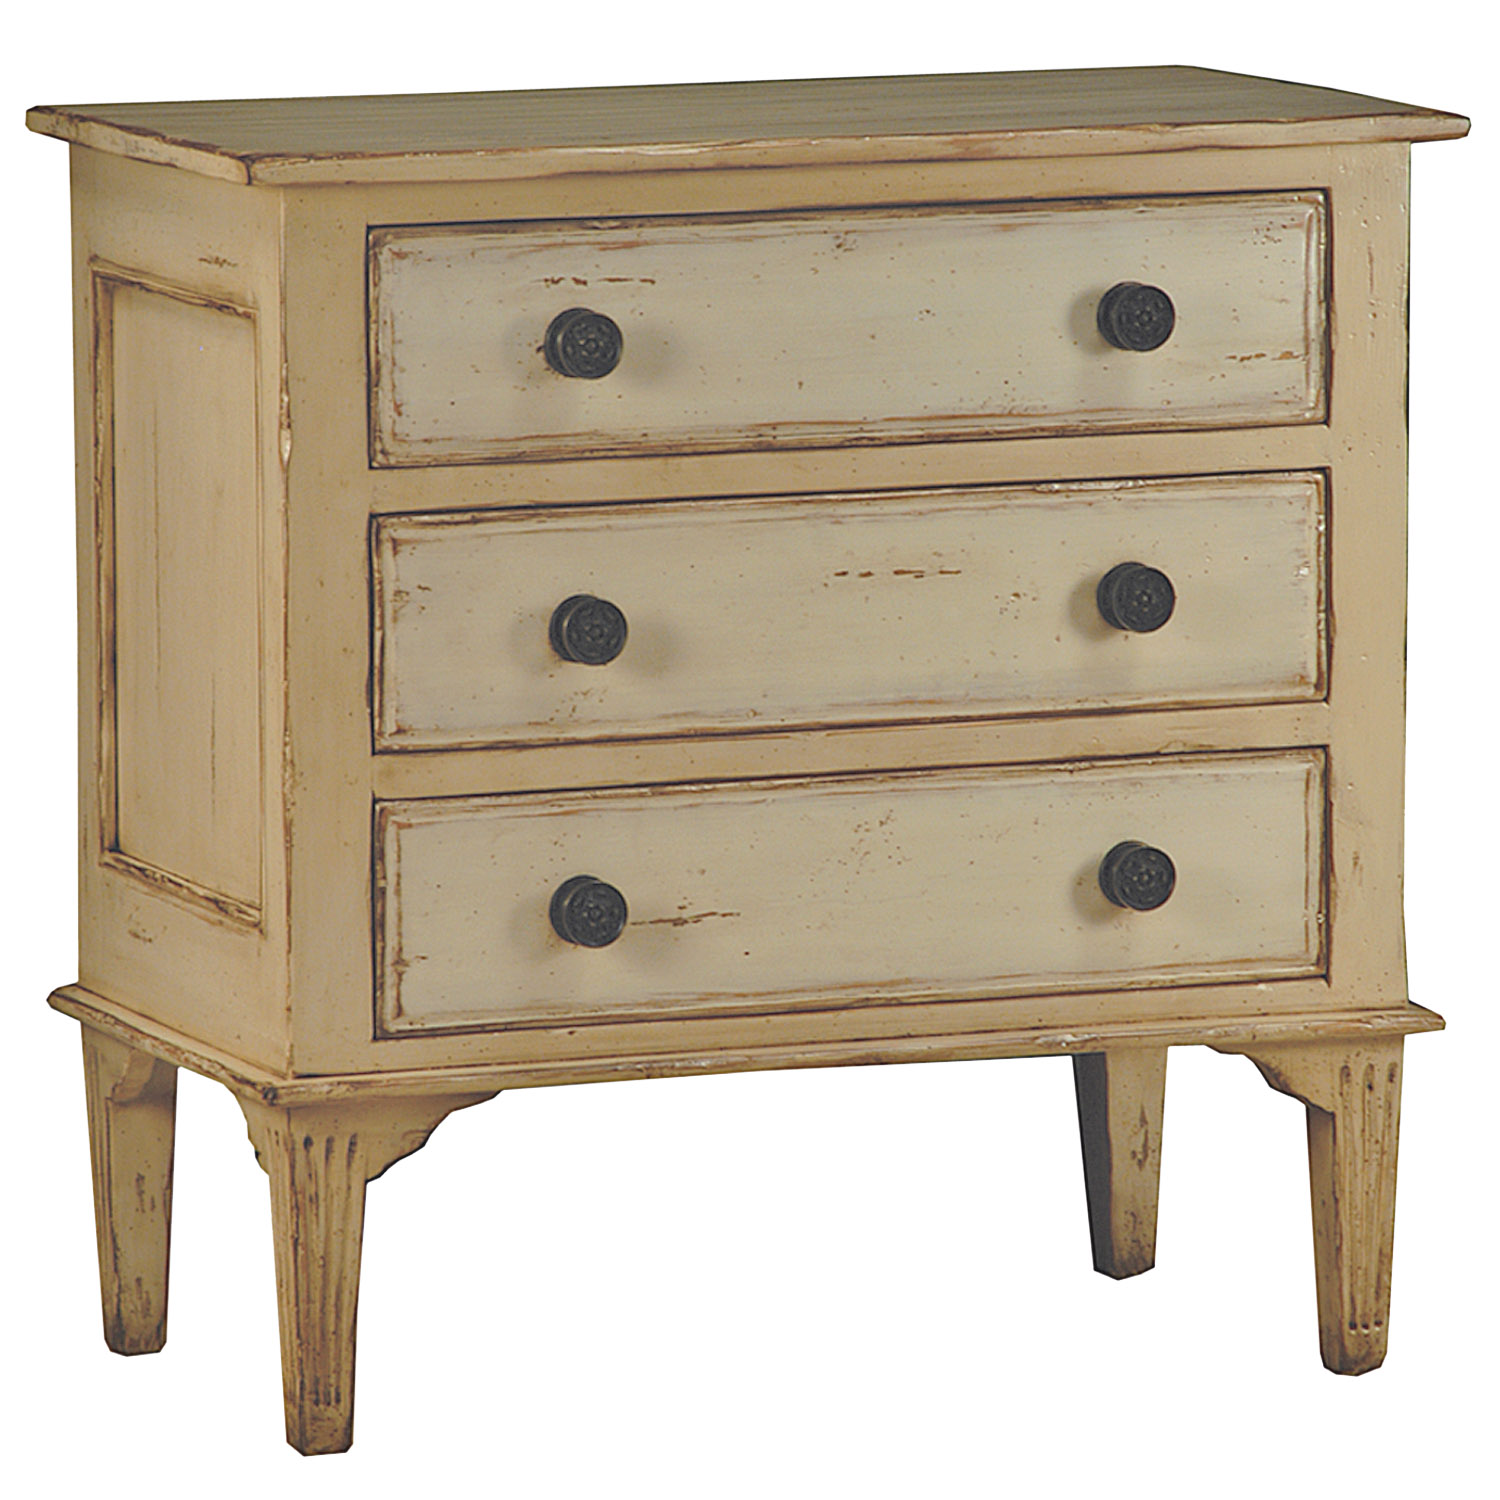 Aurelia traditional transitional chest of drawers dresser on legs by Woodland furniture in Idaho